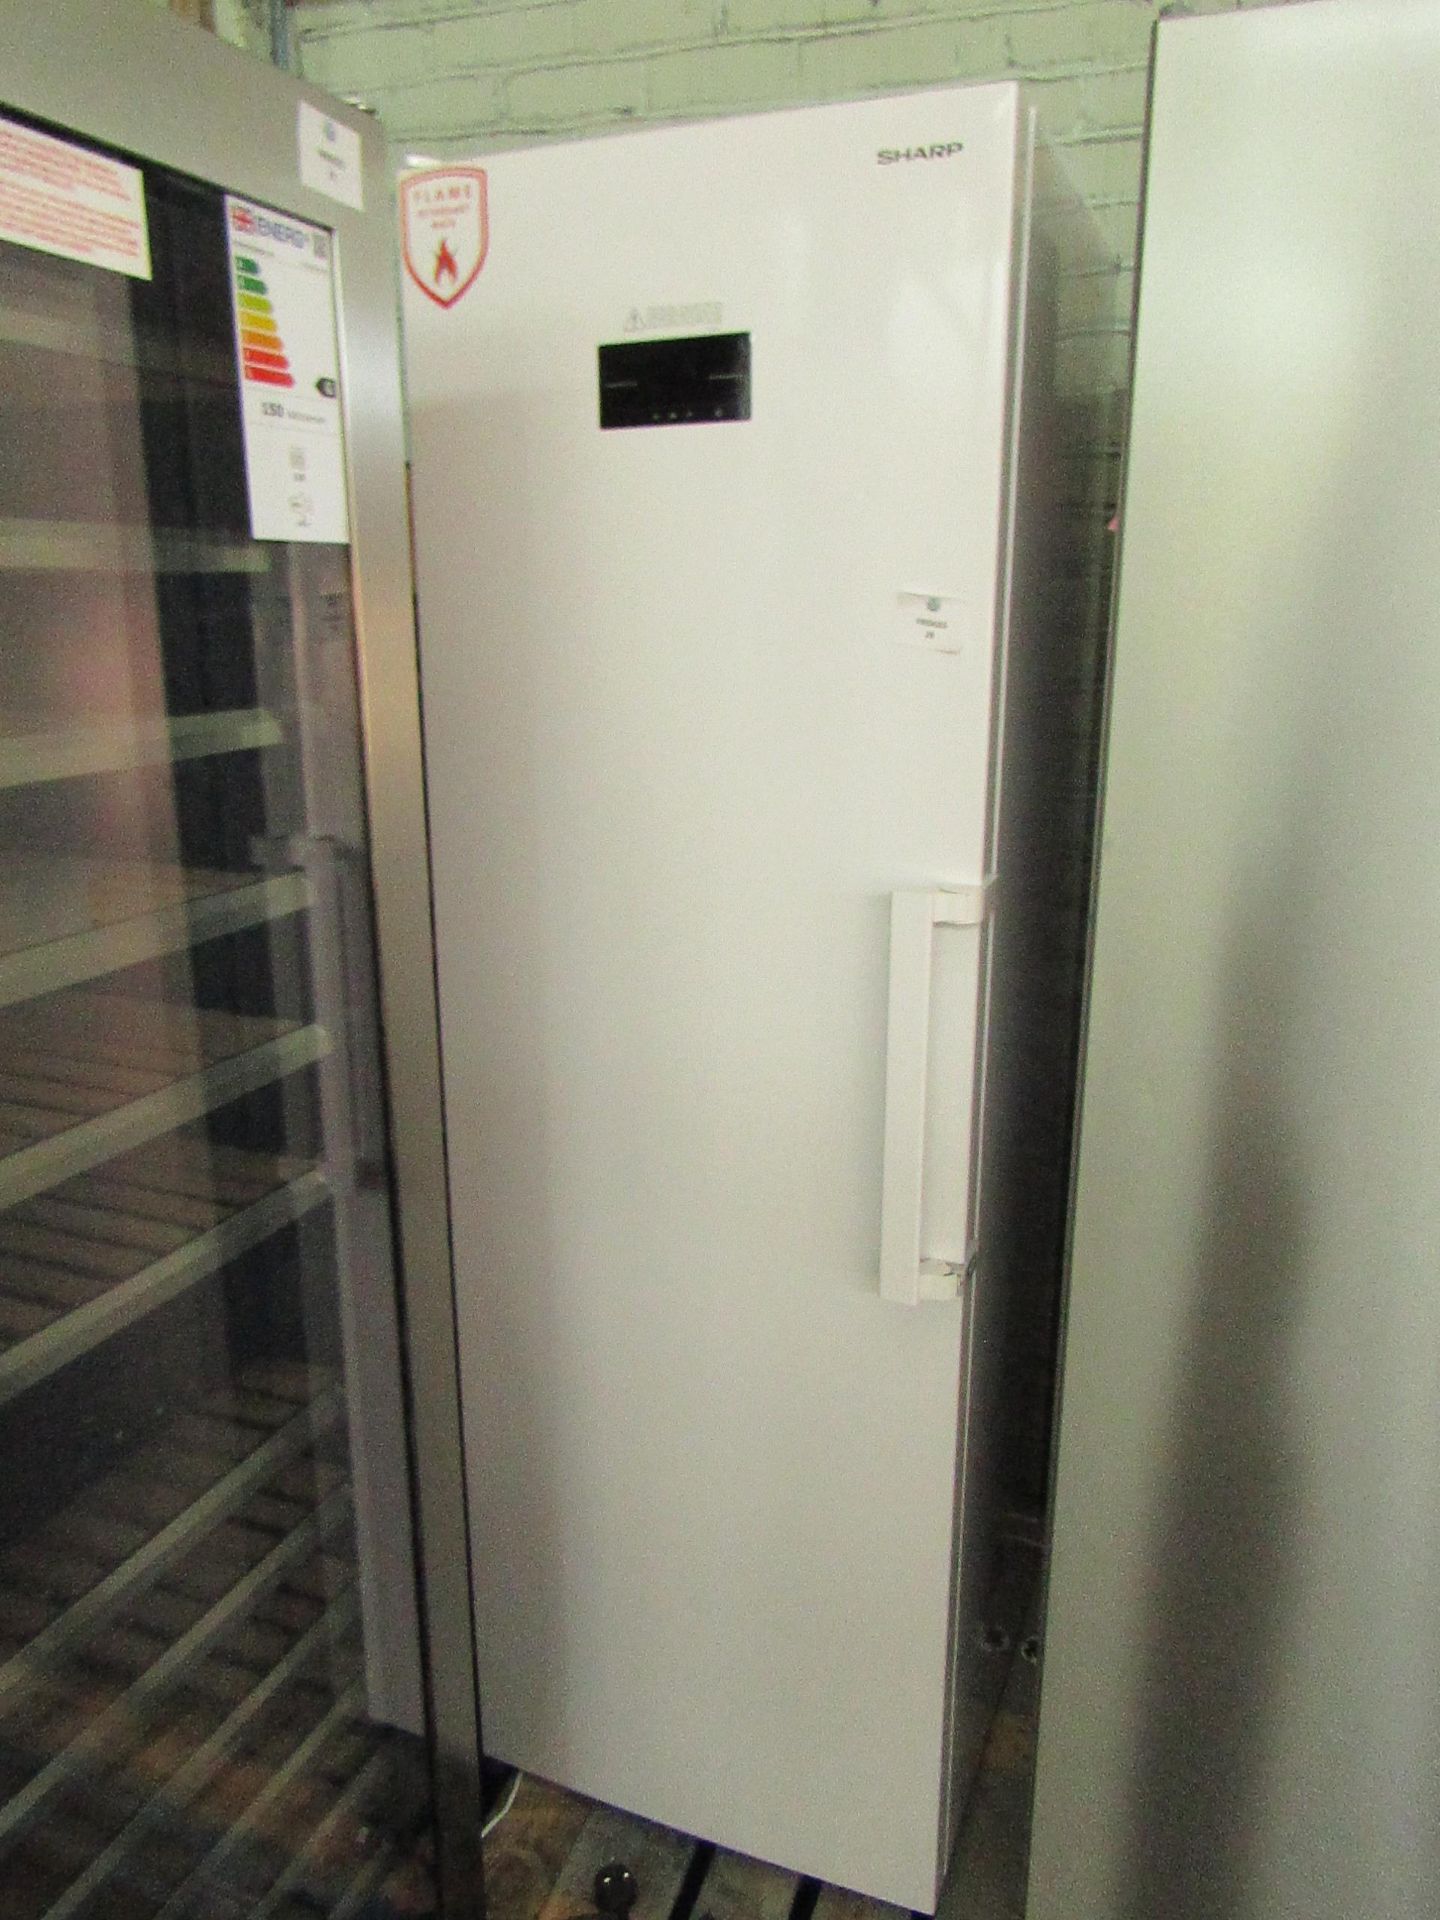 Sharp Tall Freestanding Freezer, clean inside, Onme of the covers is missing off the door handle